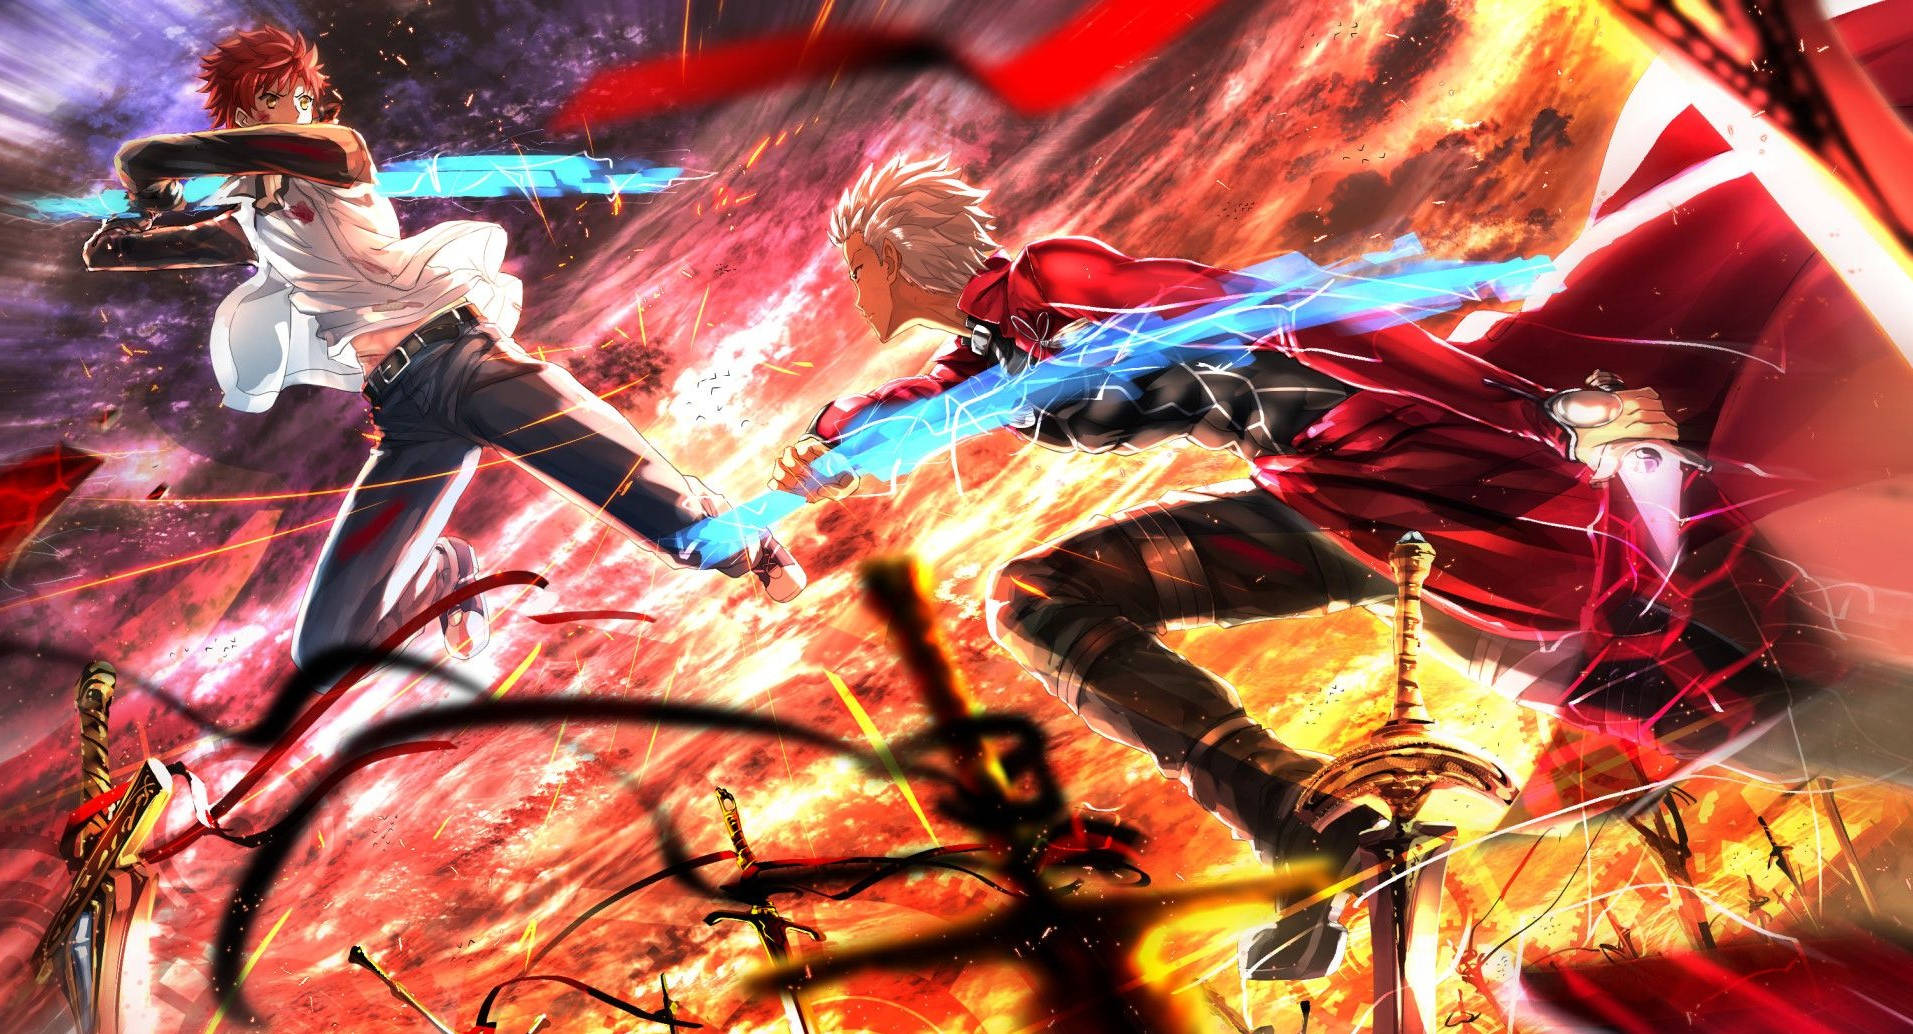 Join the Fate Series and see why its fans are dedicated Wallpaper